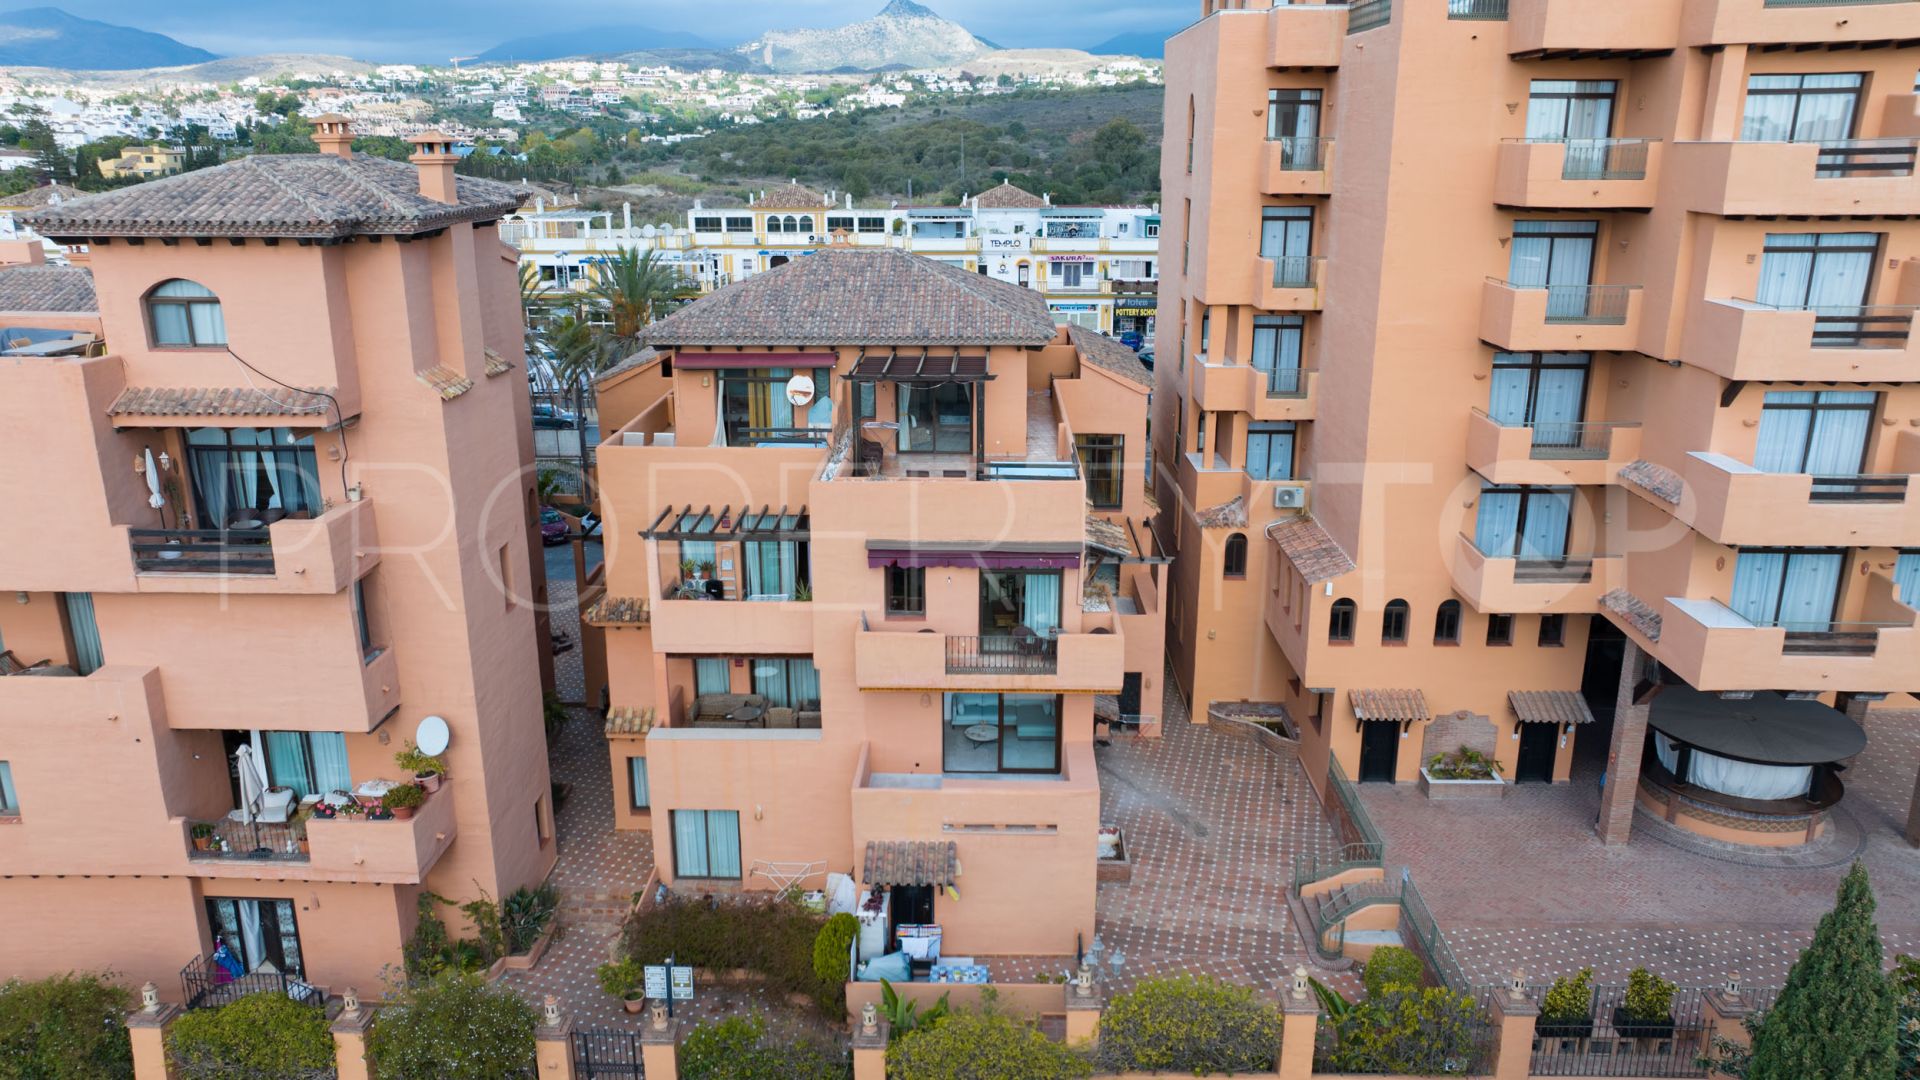 For sale Paraiso Barronal apartment with 5 bedrooms